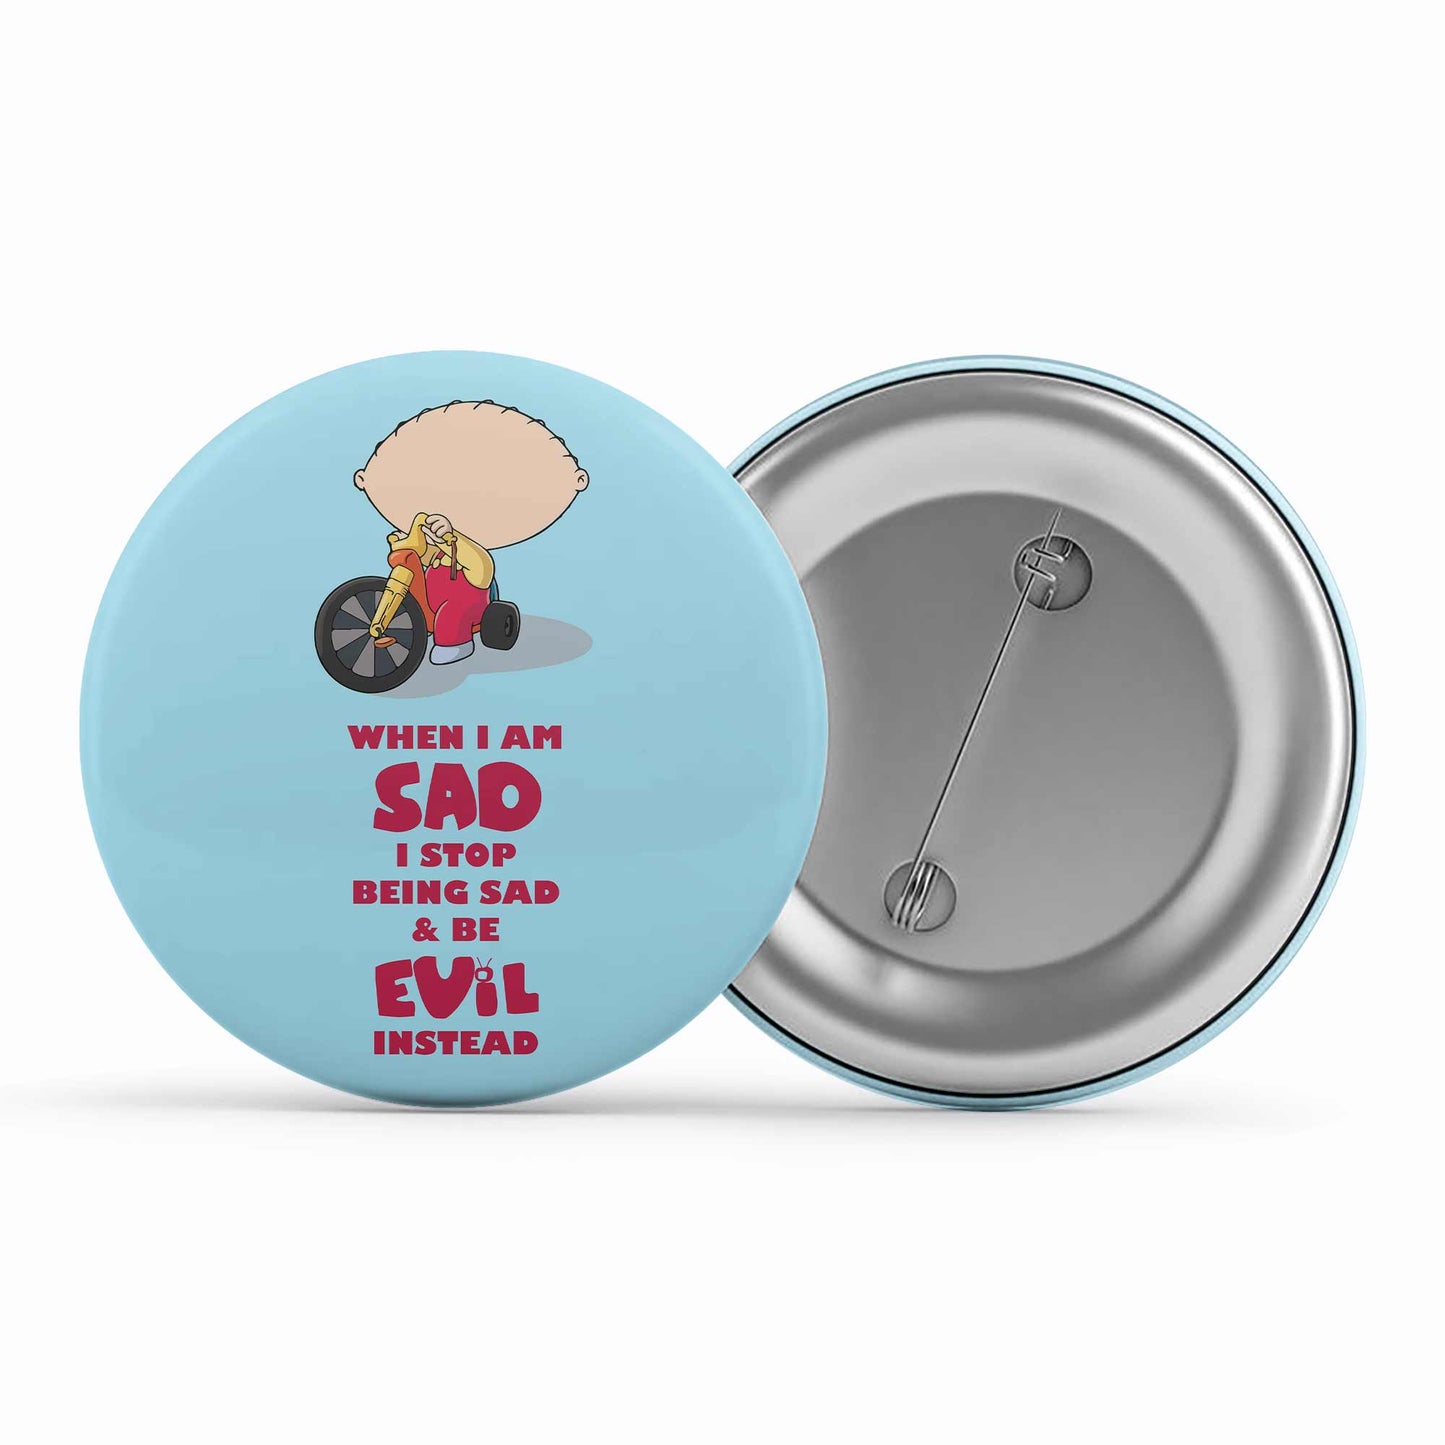 family guy be evil instead badge pin button tv & movies buy online india the banyan tee tbt men women girls boys unisex  - stewie griffin dialogue